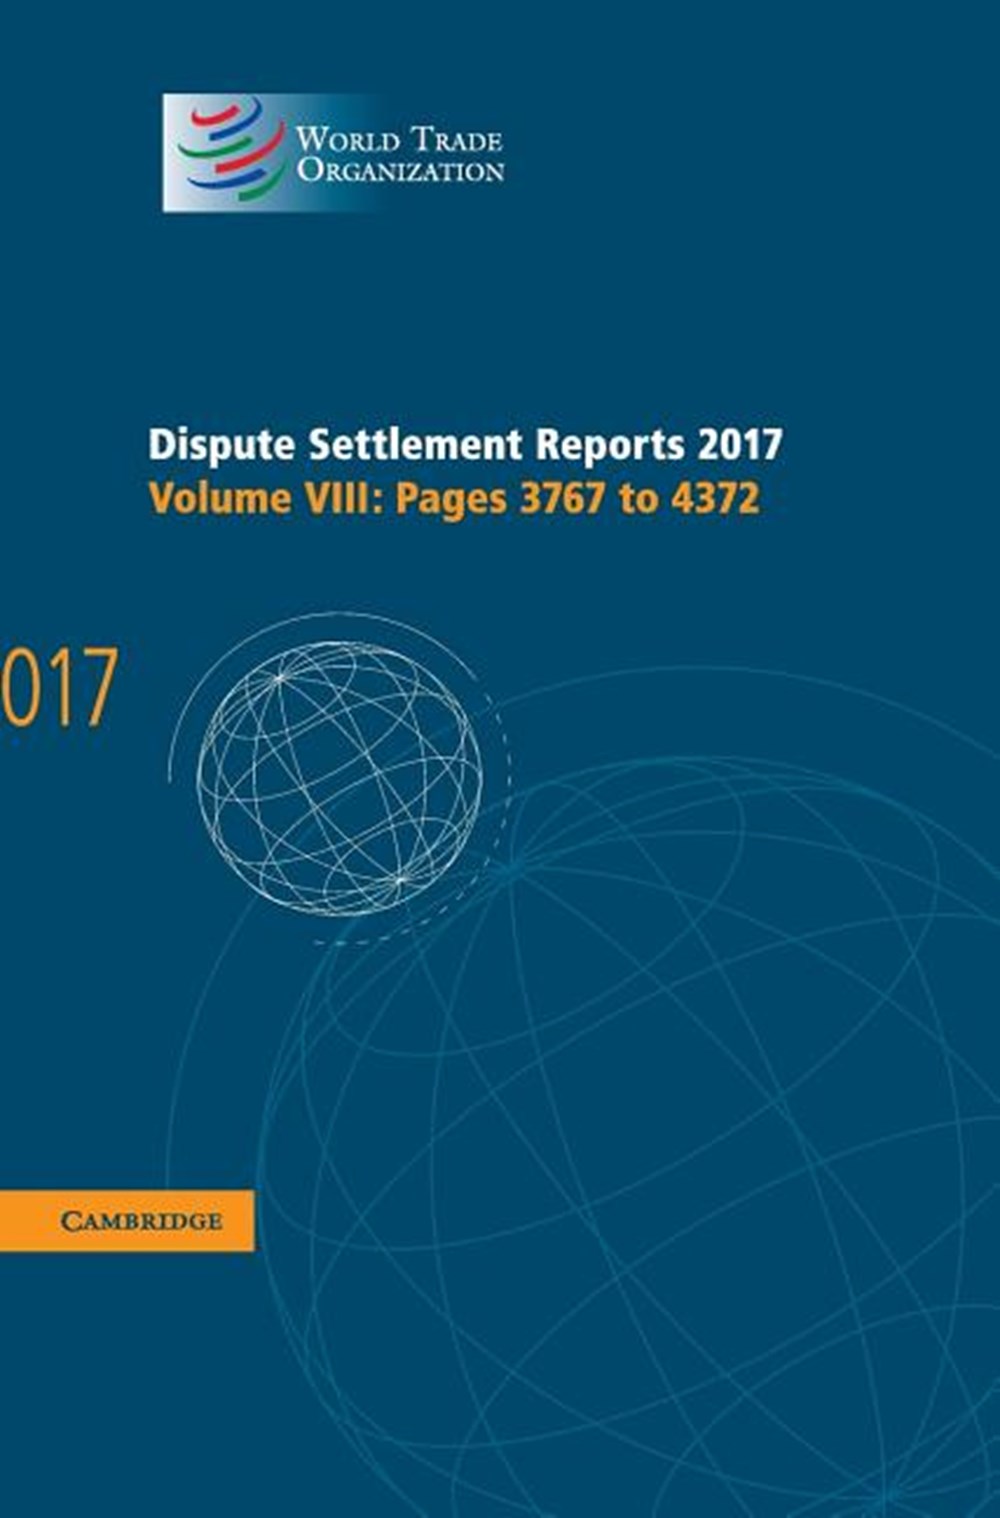 Dispute Settlement Reports 2017 Volume 8, Pages 3767 to 4372